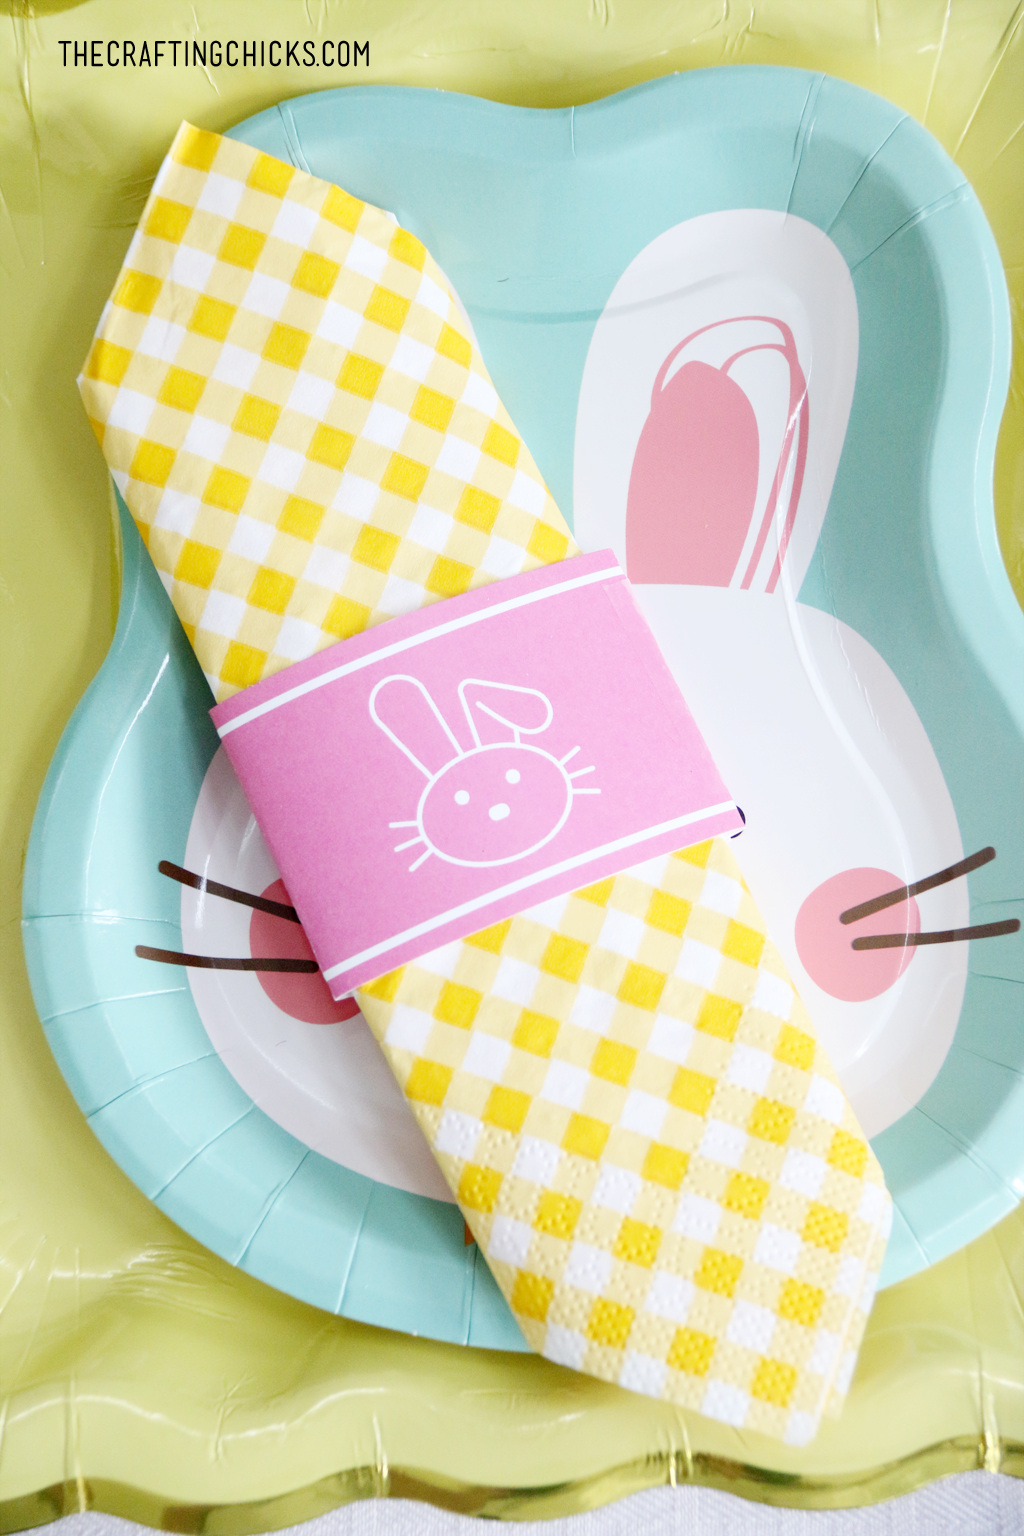 BUNNY YELLOW CHICK BRIGHT TISSUE PAPER SHEETS EASTER DECORATIONS EGG 